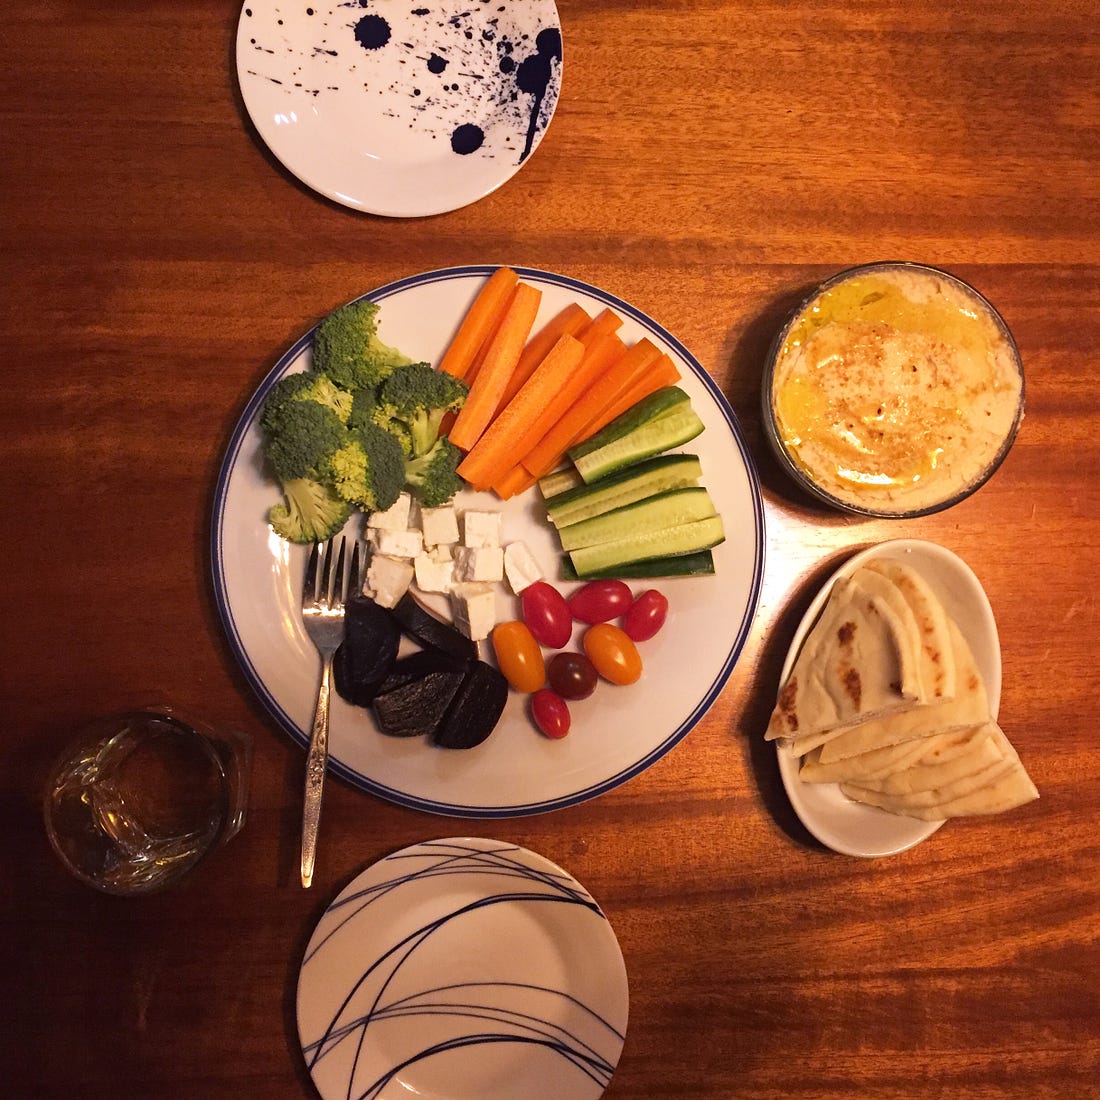 A large plate of broccoli, carrot and cucumber sticks, and grape tomatoes with cubes of feta and pickled beets. To its right is a small dish of flatbread wedges, and a glass container of white bean hummus dusted with paprika and coated in olive oil. Two small plates sit on either side of the food.